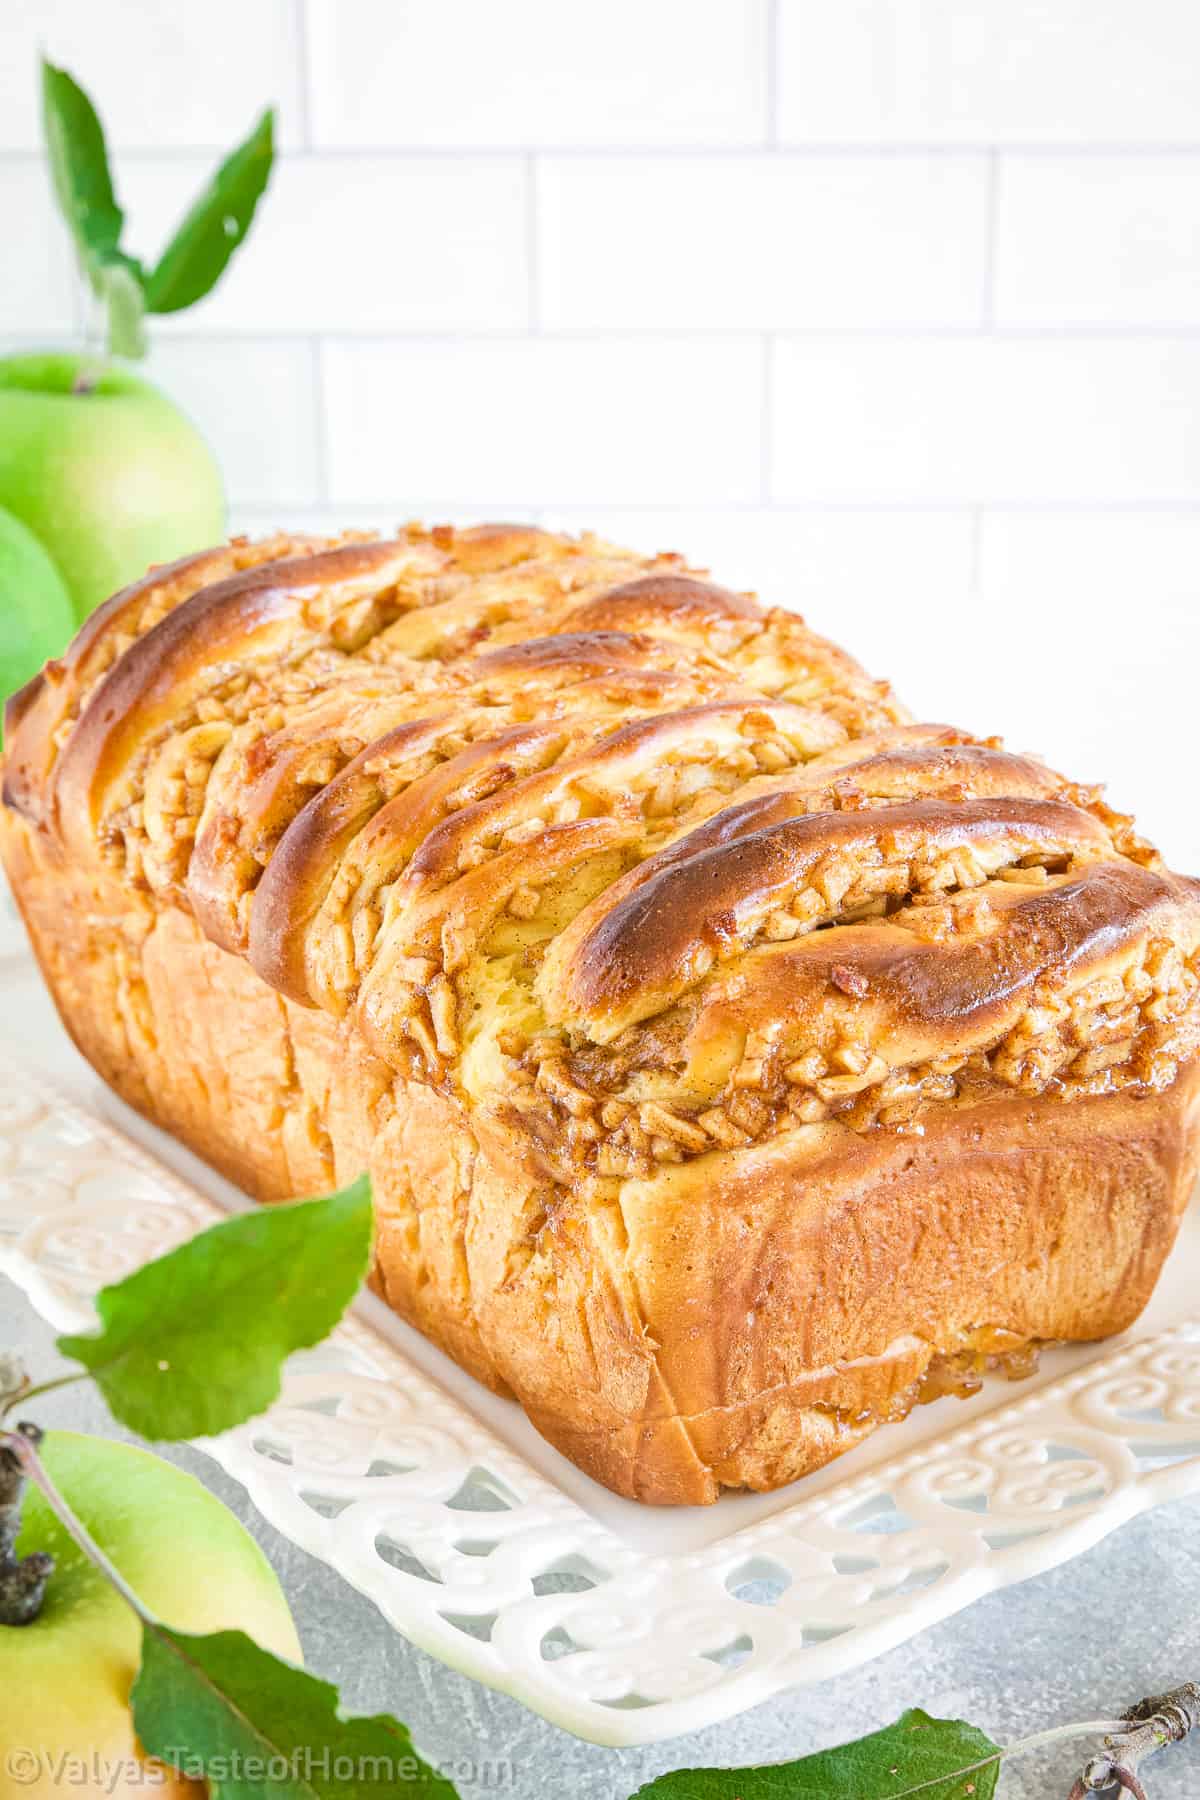 Apple fritter bread is a delicious sweet bread that is made with diced apples, cinnamon, and a sweet glaze.